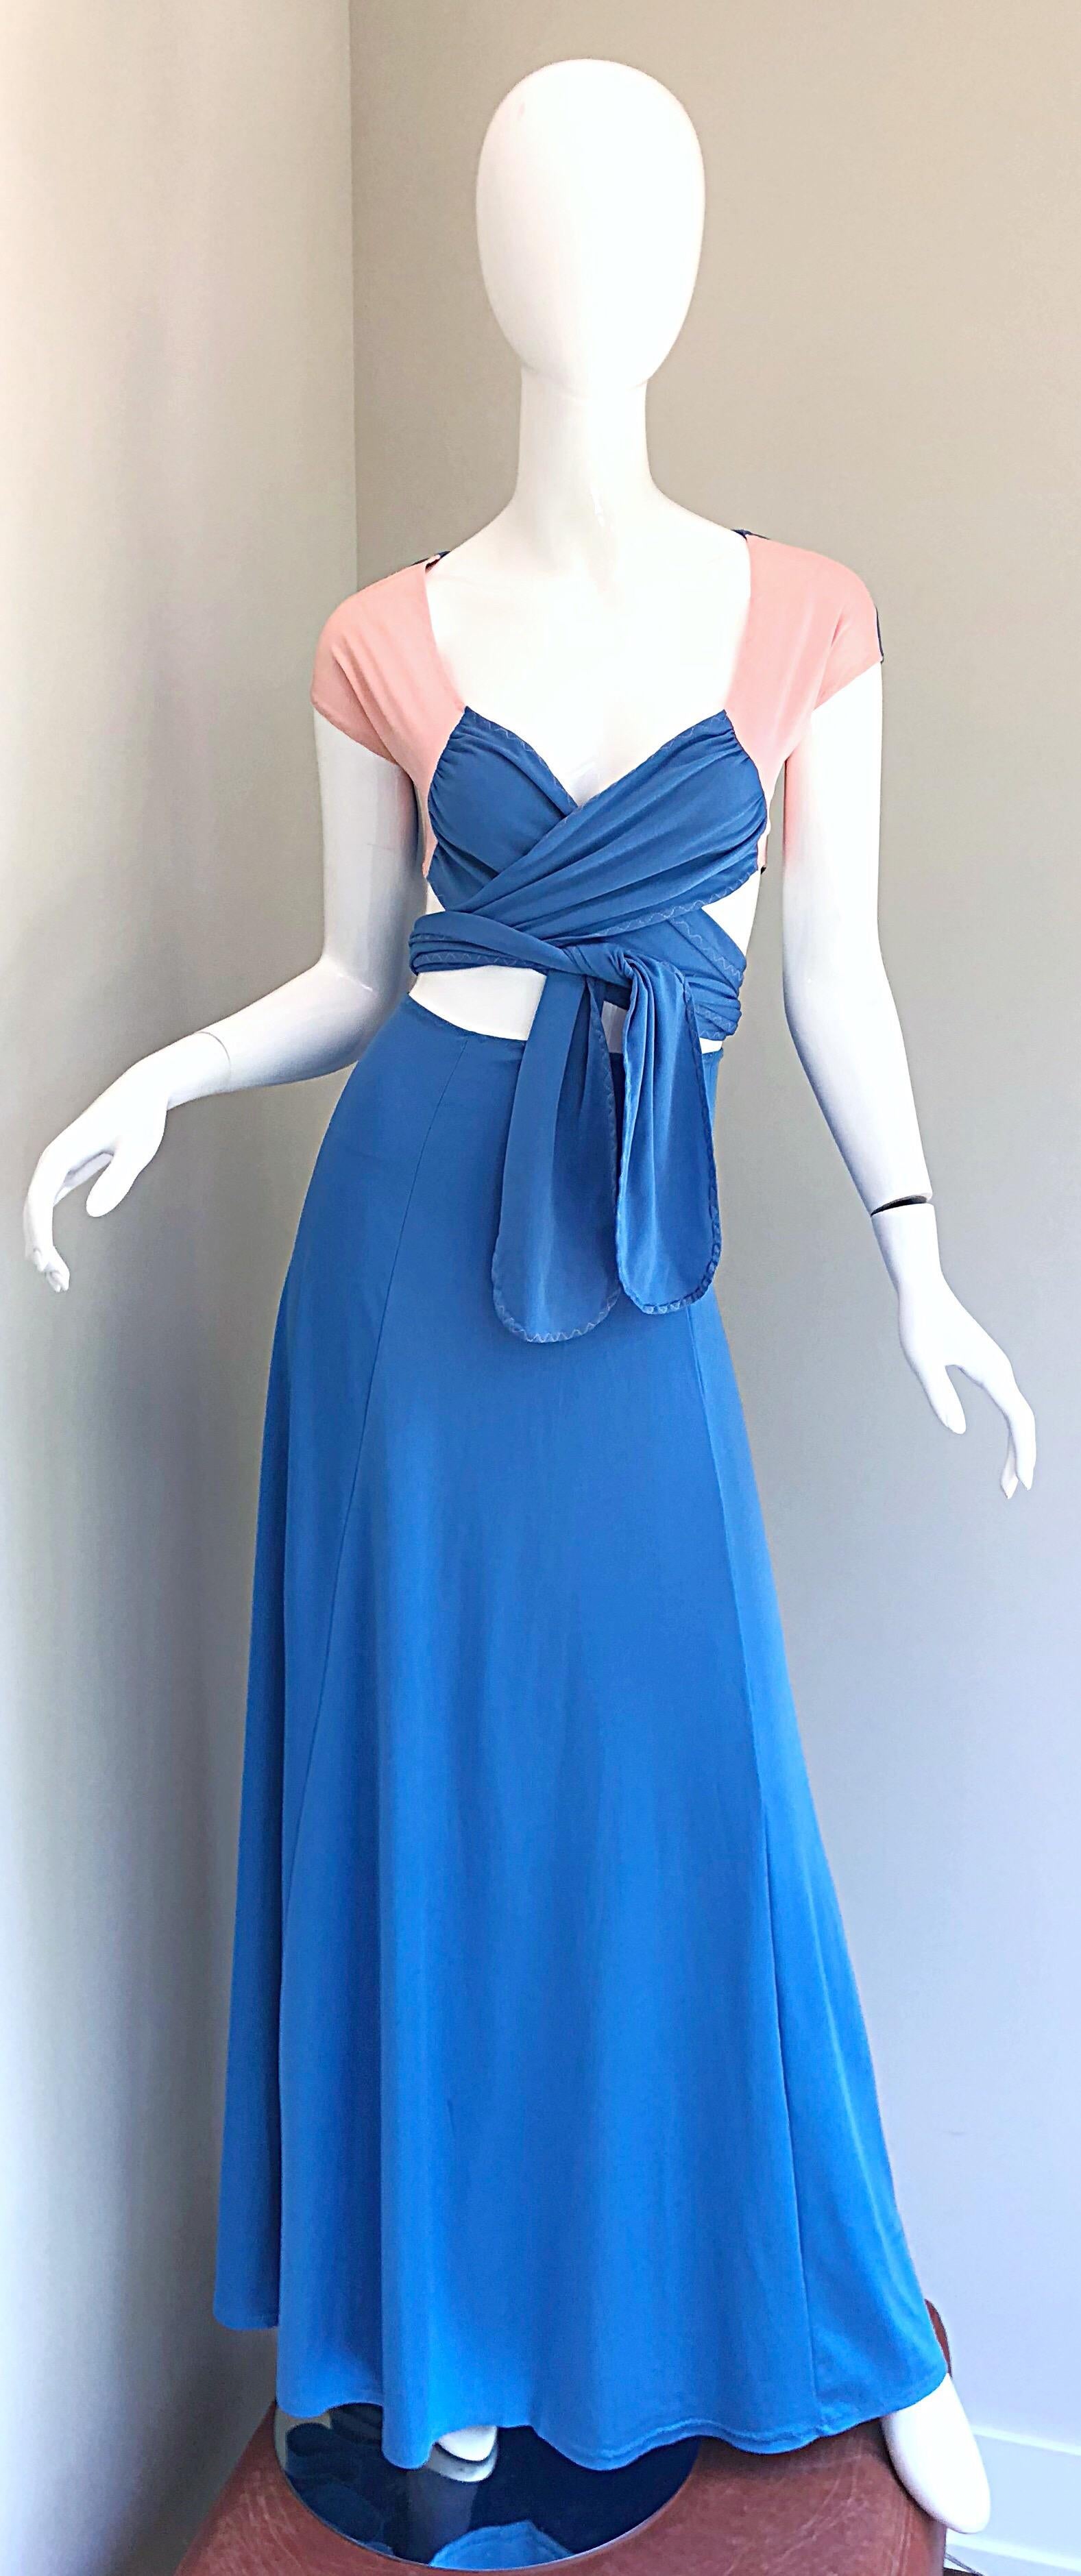 Amazing 70s M BASSEL blue and pale pink cropped top and maxi skirt! Features a flattering stretch jersey wrap crop top that can either be tied in the front or back. Skirt features an elastic waistband to stretch to fit. Both pieces great together or